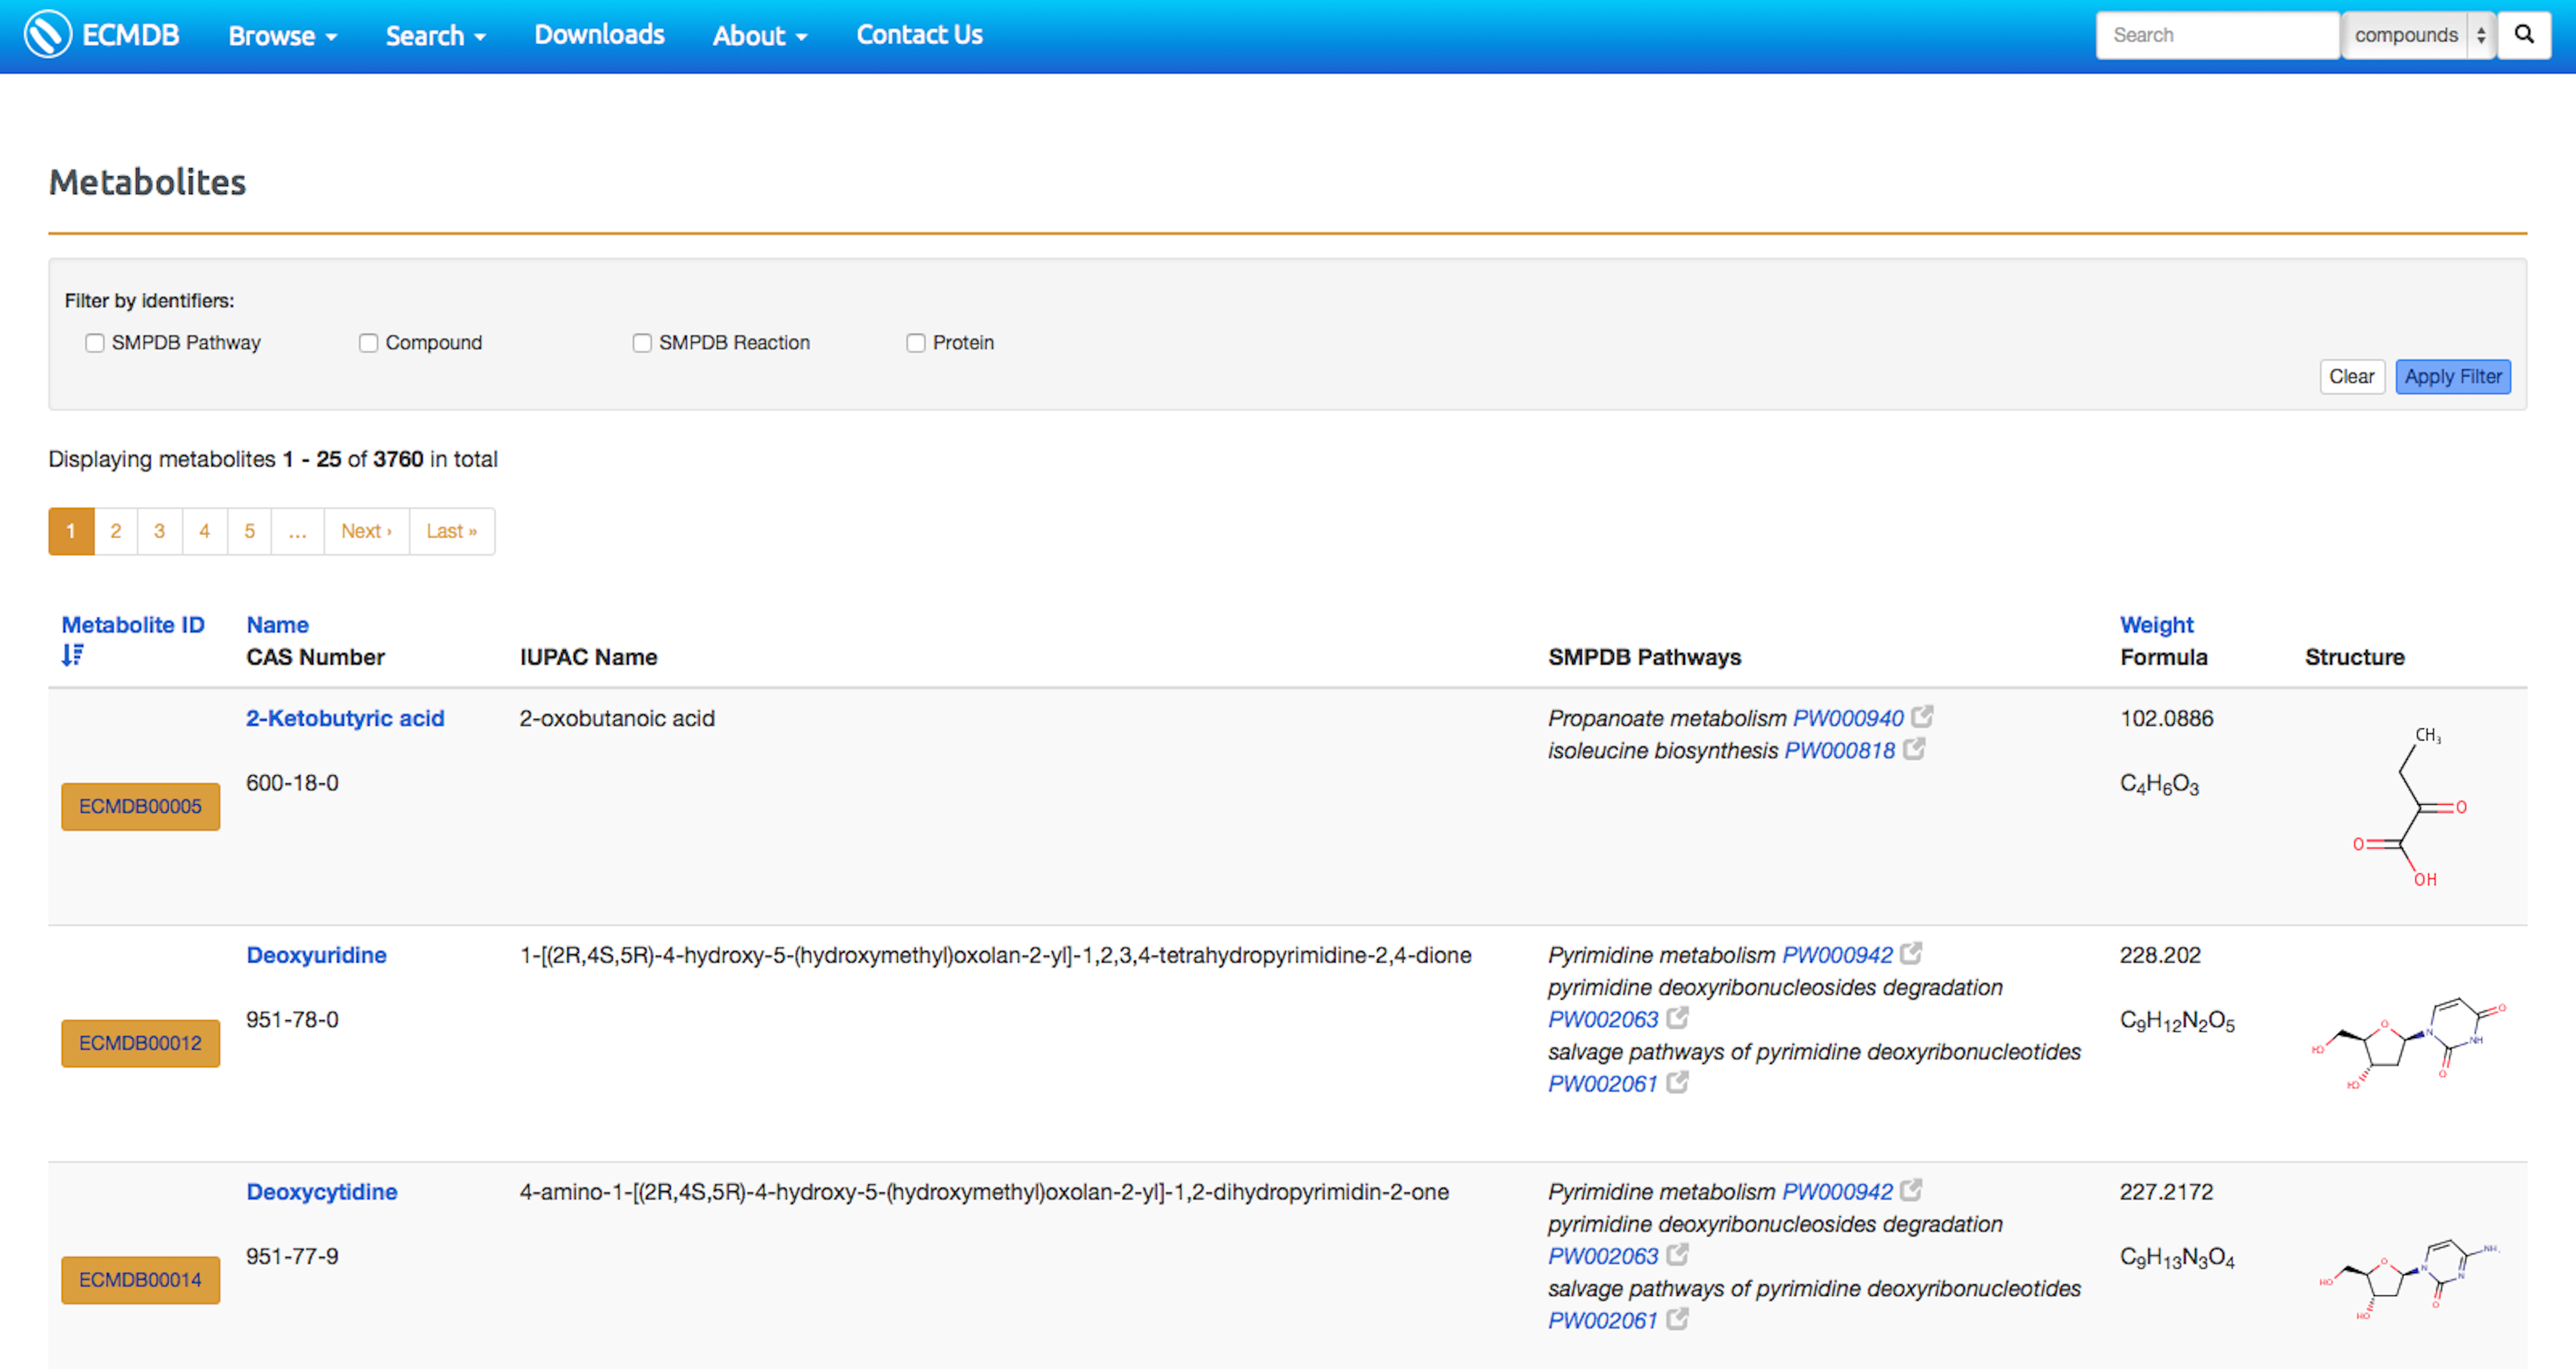 Snapshot of the Metabolite Browse page